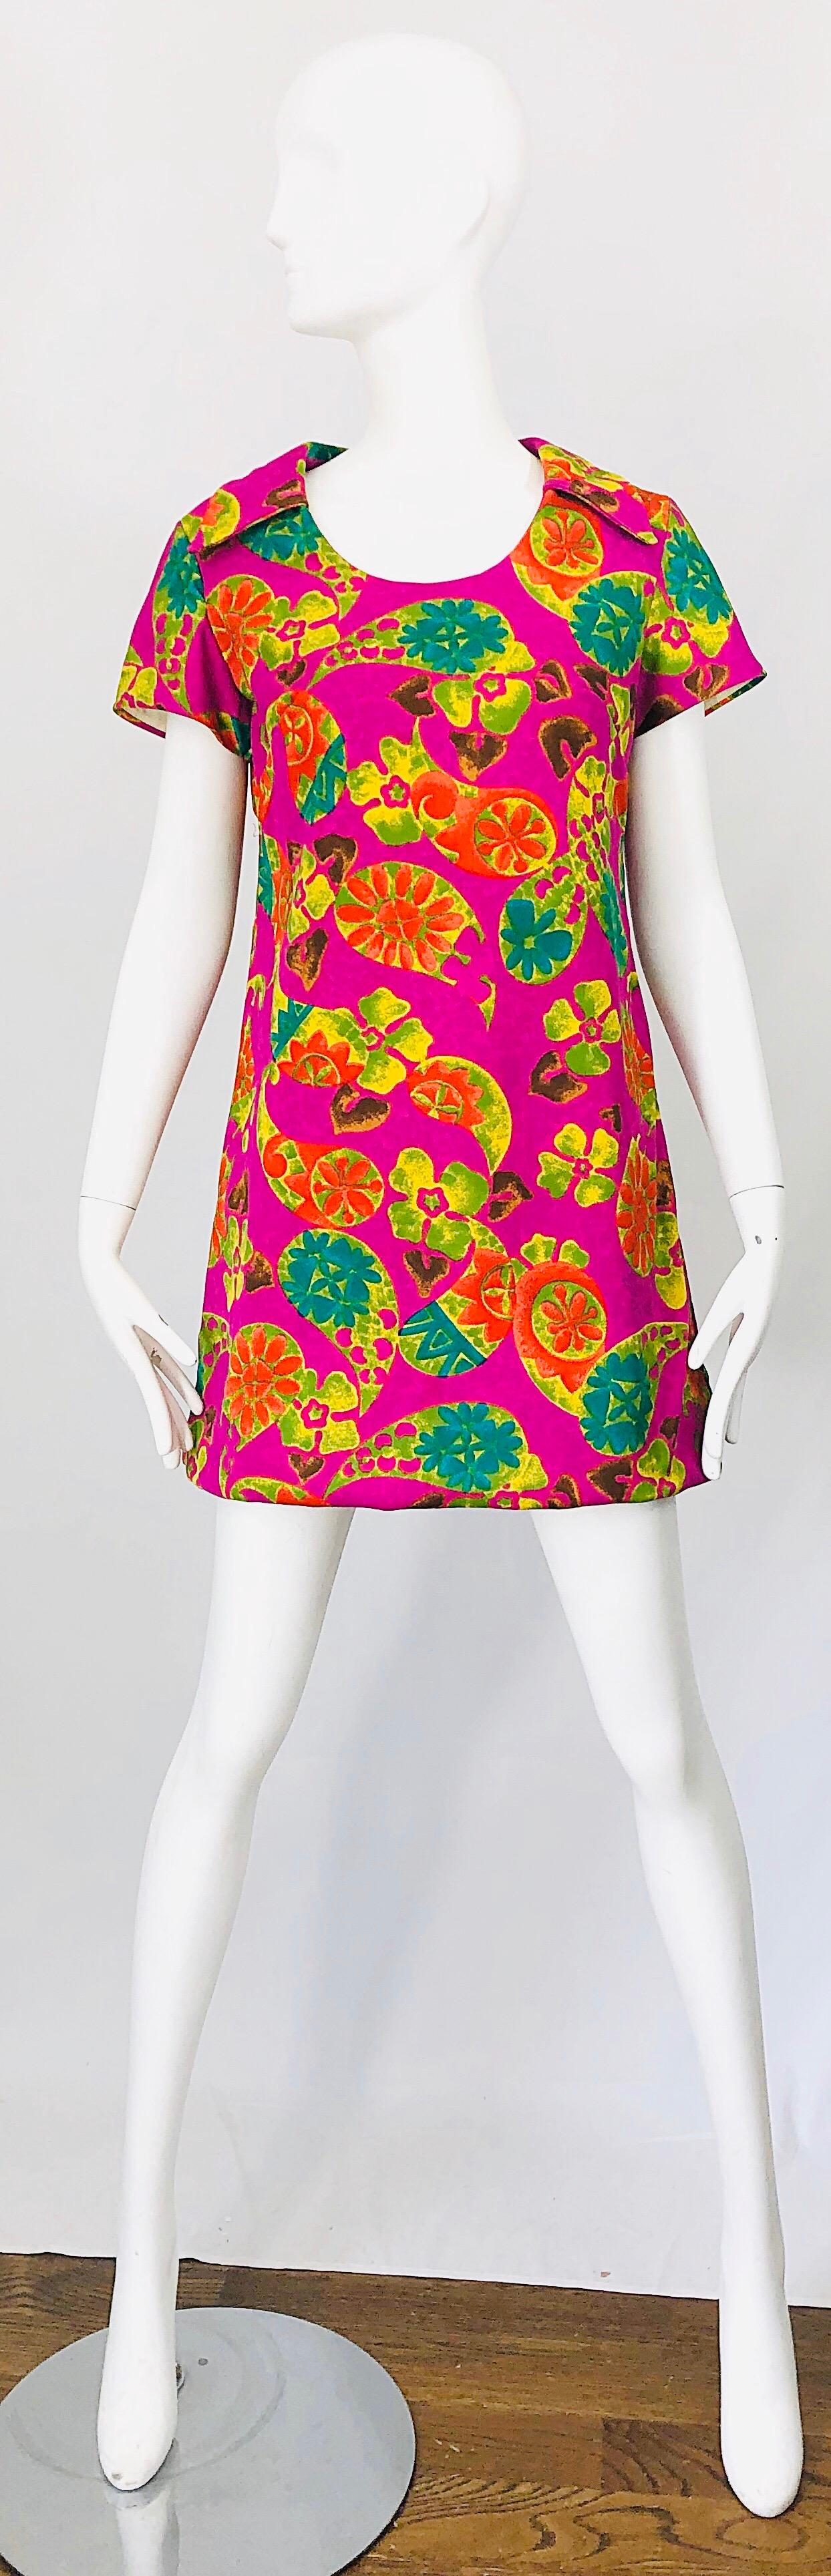 Chic 1960s Hawaiian Tiki print fuchsia pink cotton tunic / mini dress! Features vibrant colors of pink, purple, chartreuse, kelly green, and orange throughout. Hidden metal zipper up the back with hook-and-eye closure. There is seam allowance to